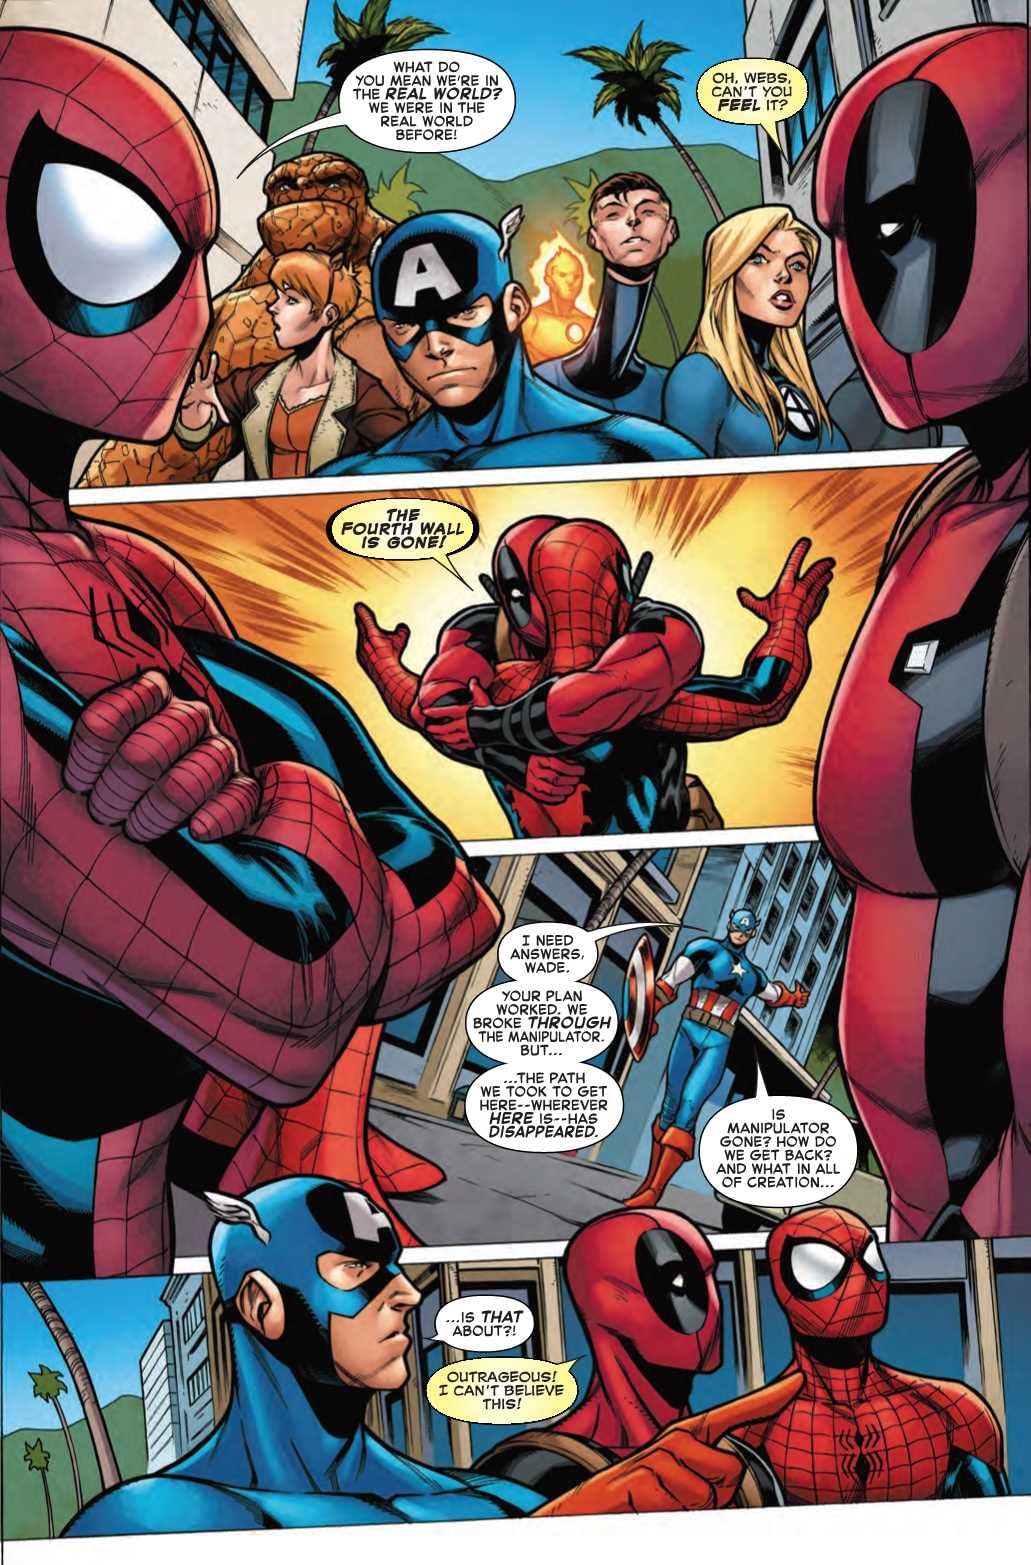 Can Spider-Man/Deadpool #50 Recapture That Rob Liefeld Magic? (Preview)